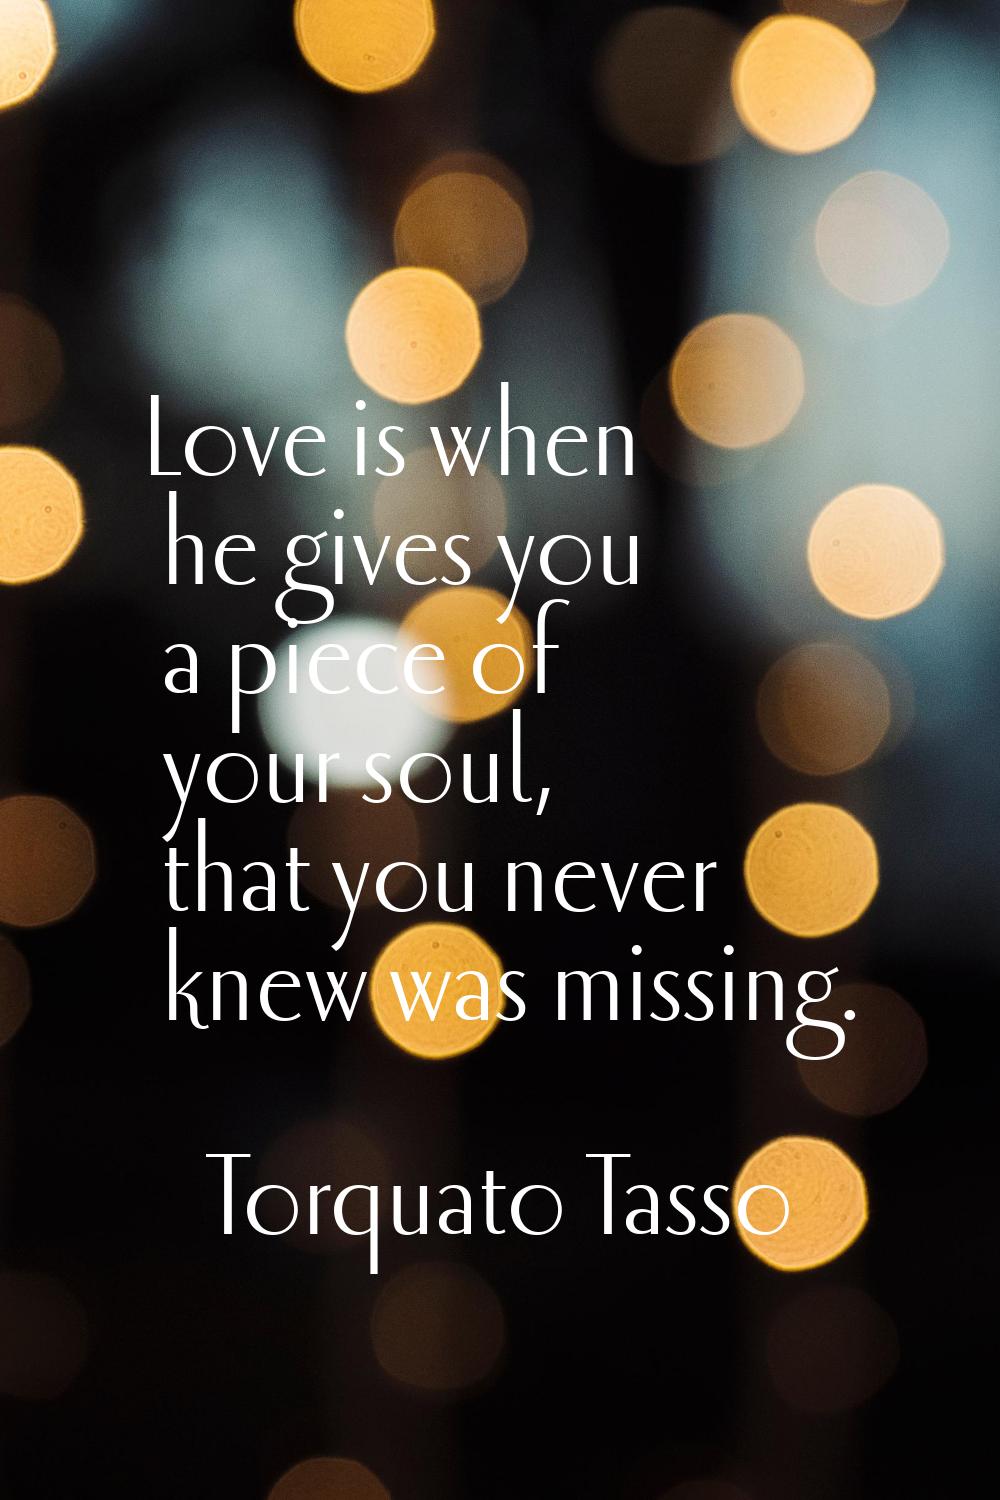 Love is when he gives you a piece of your soul, that you never knew was missing.